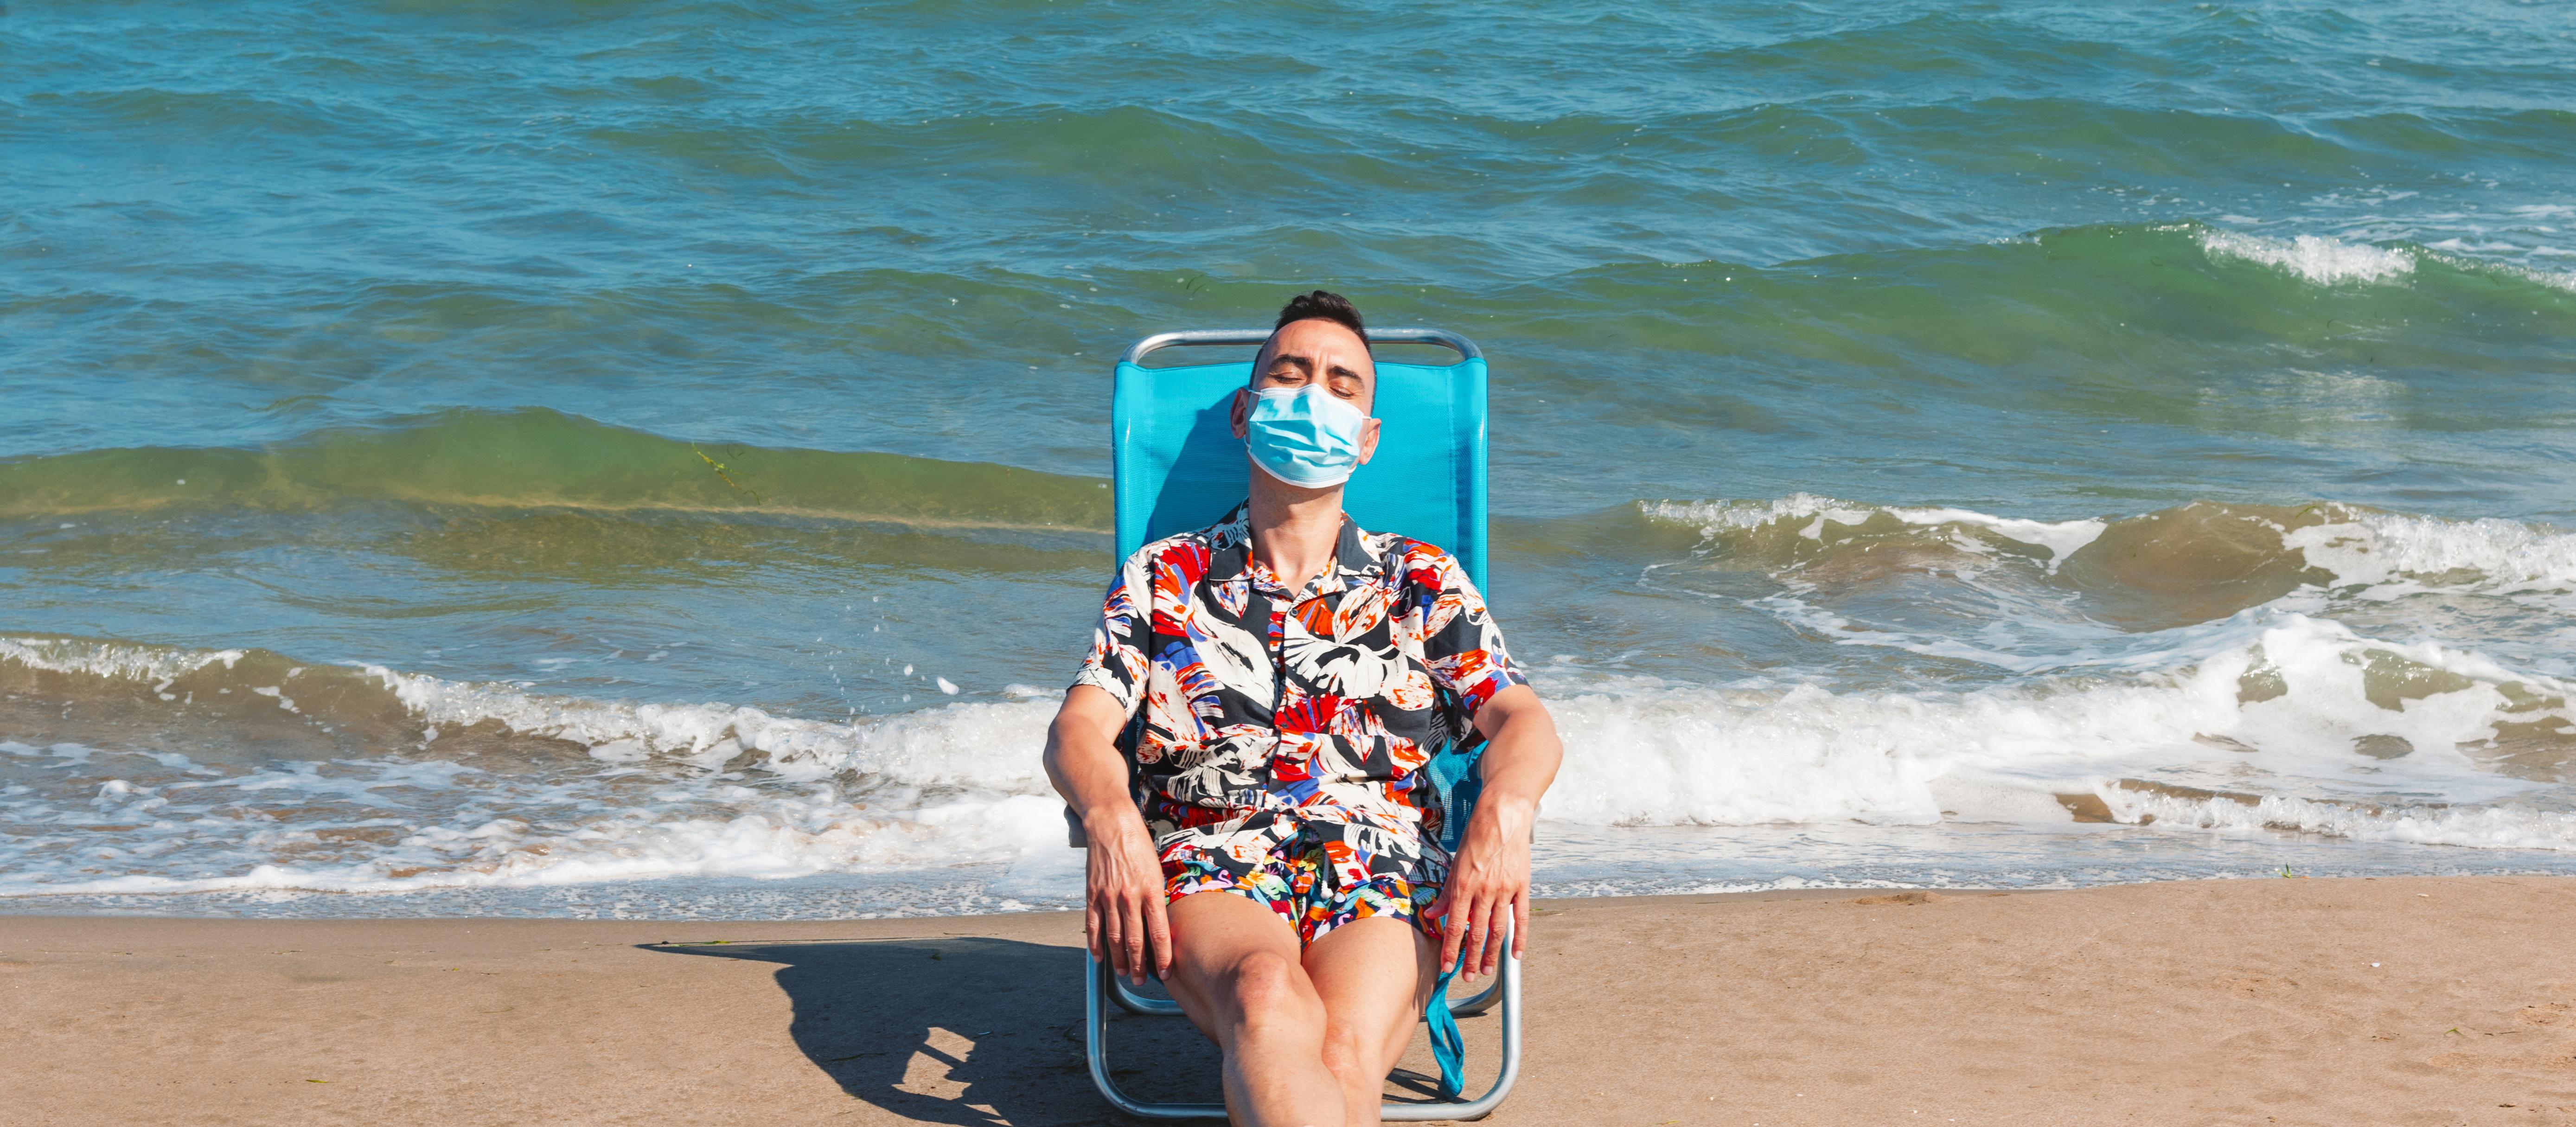 Man relaxing on a beach with mask